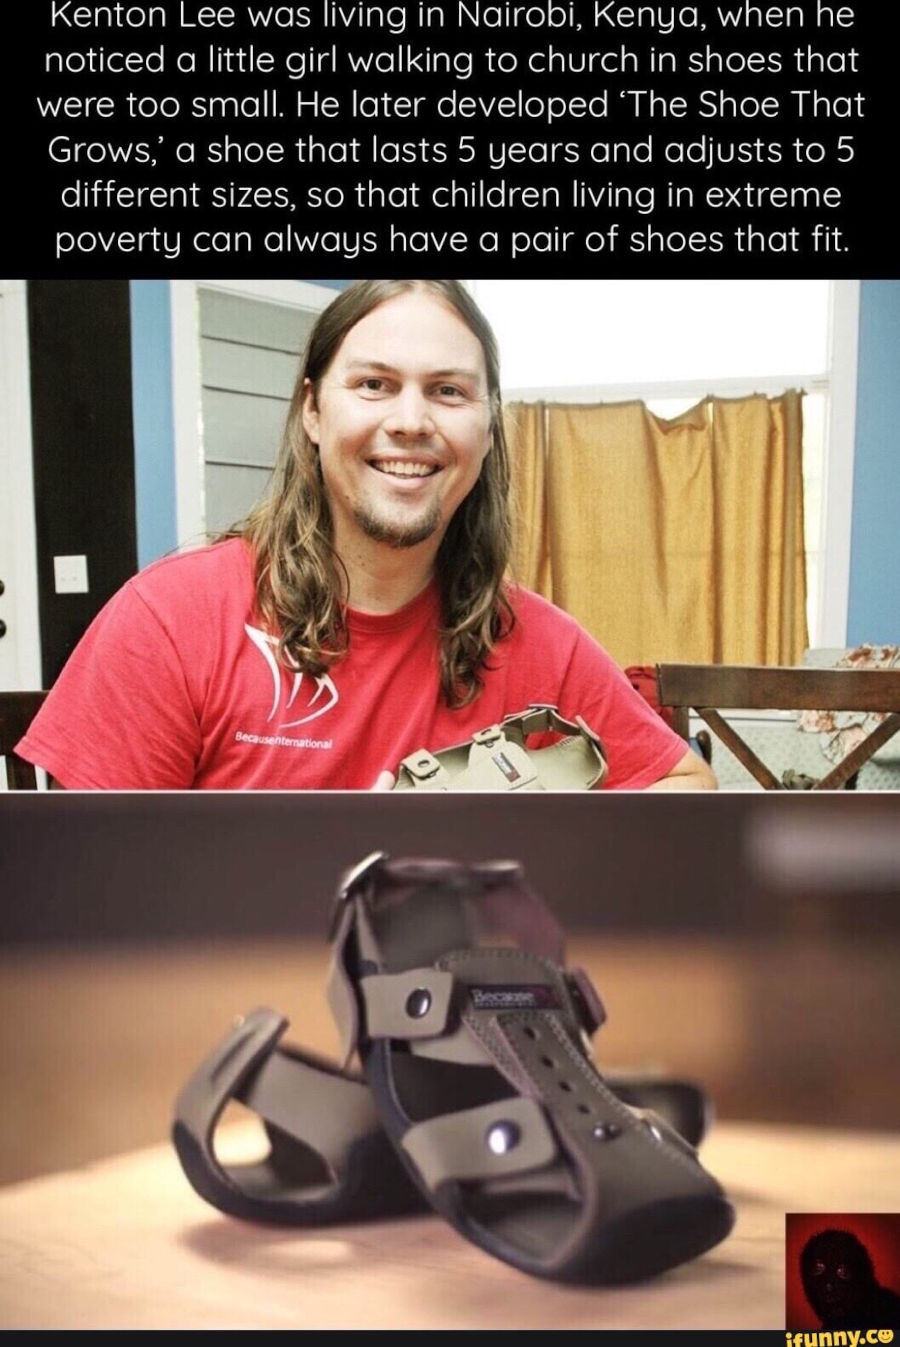 The Shoe That Grows